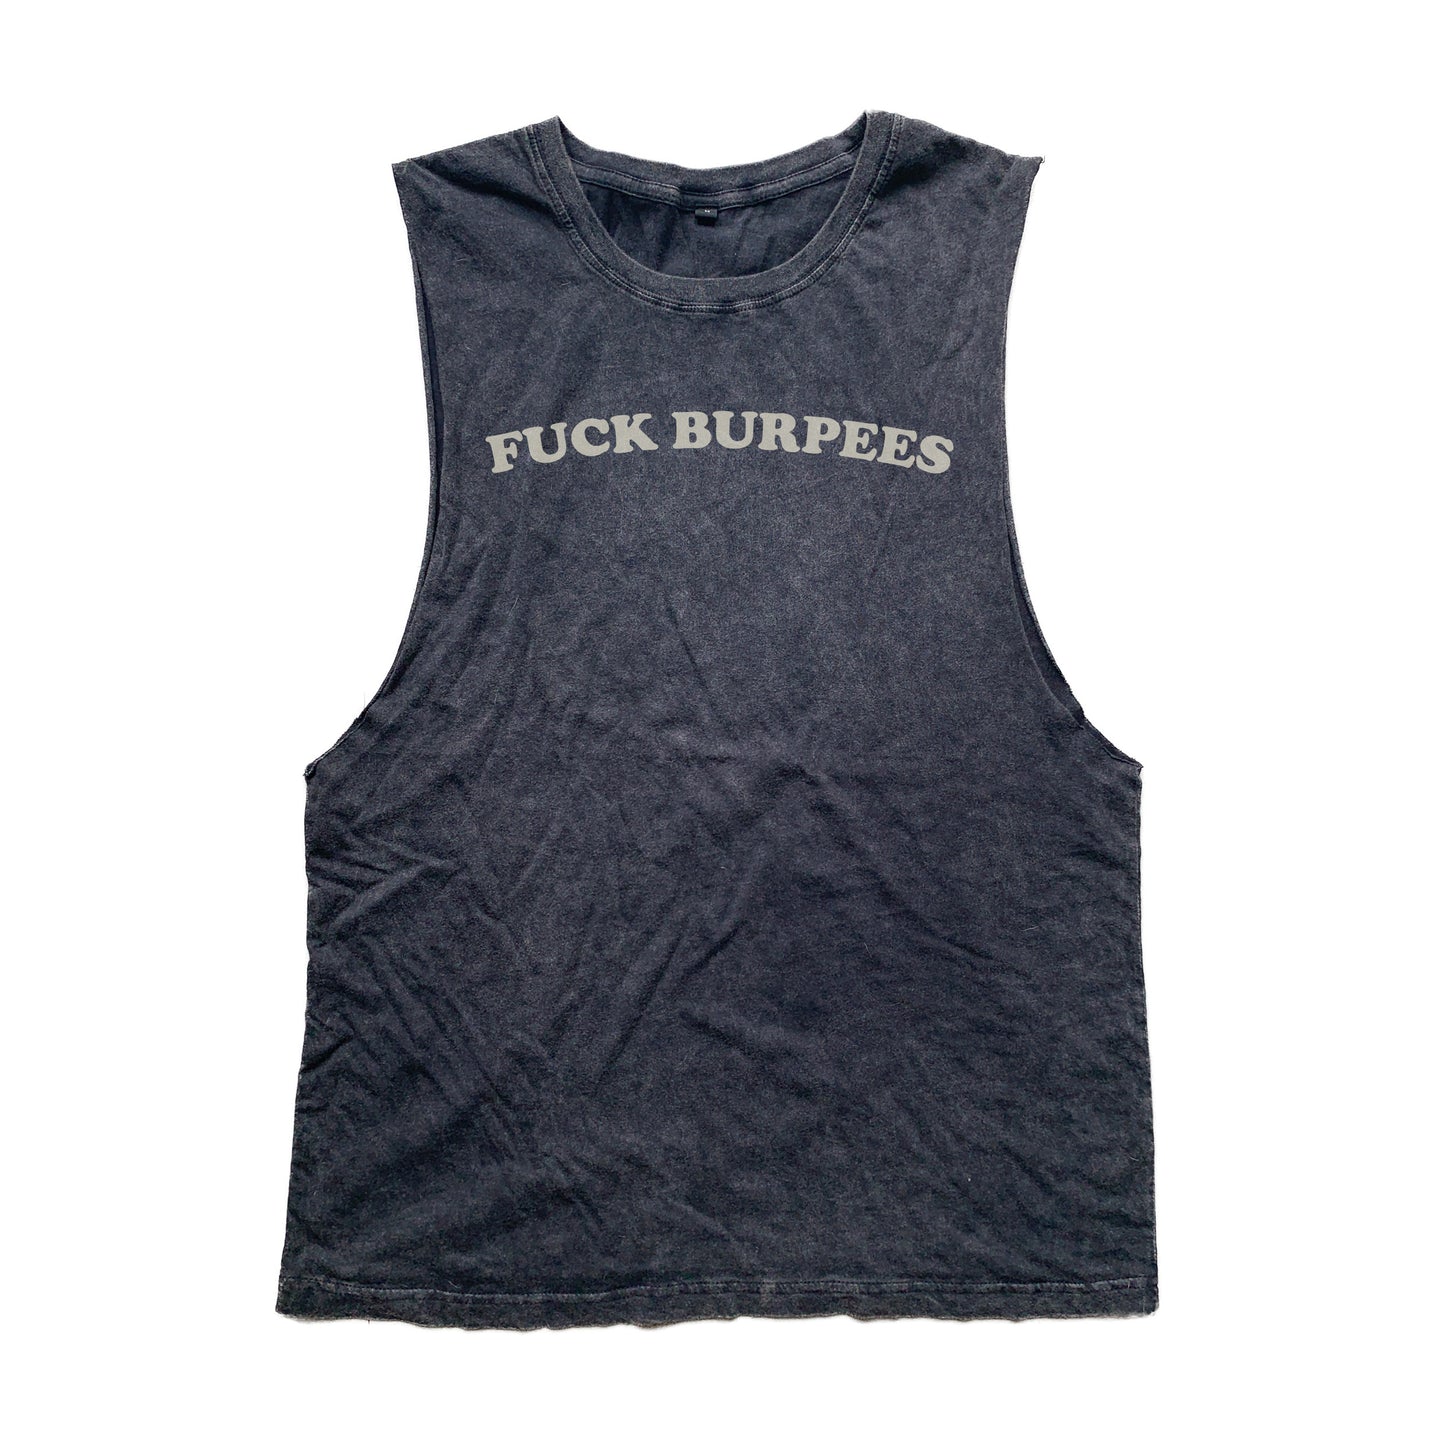 Fuck burpees muscle tank